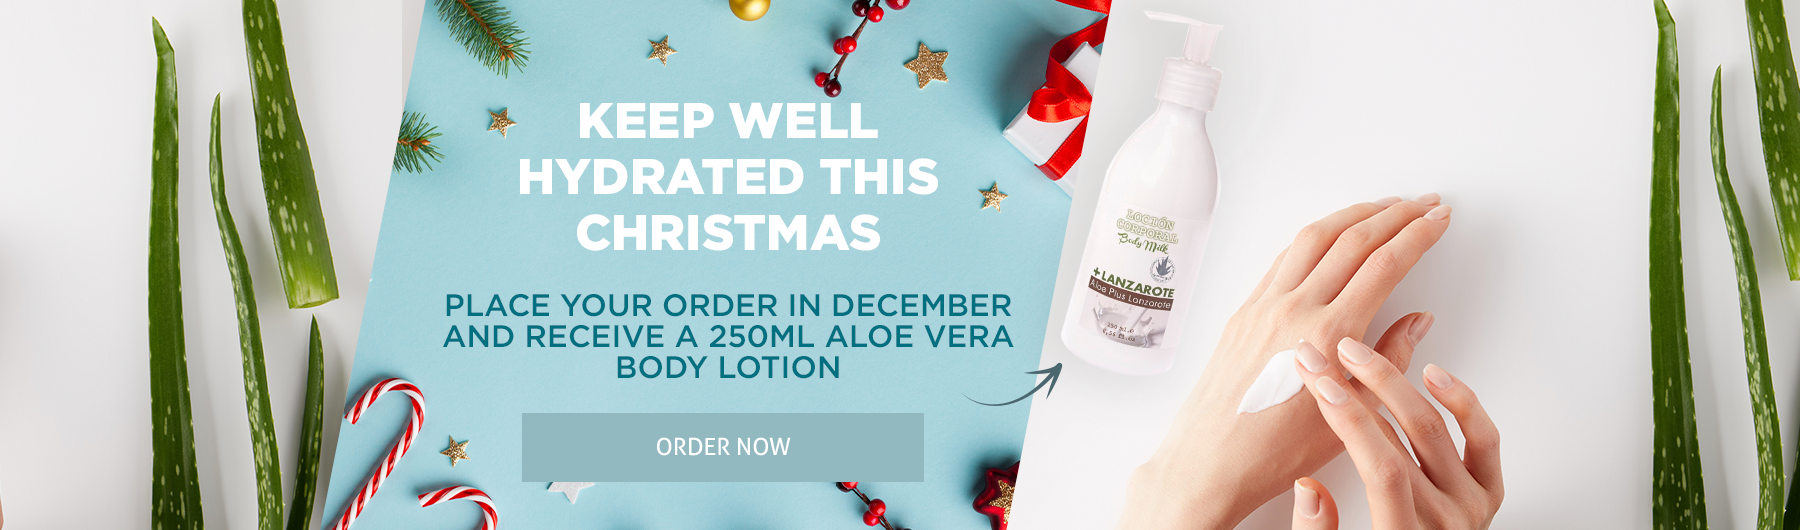 Place your order in december and receive a 250ml aloe vera body lotion